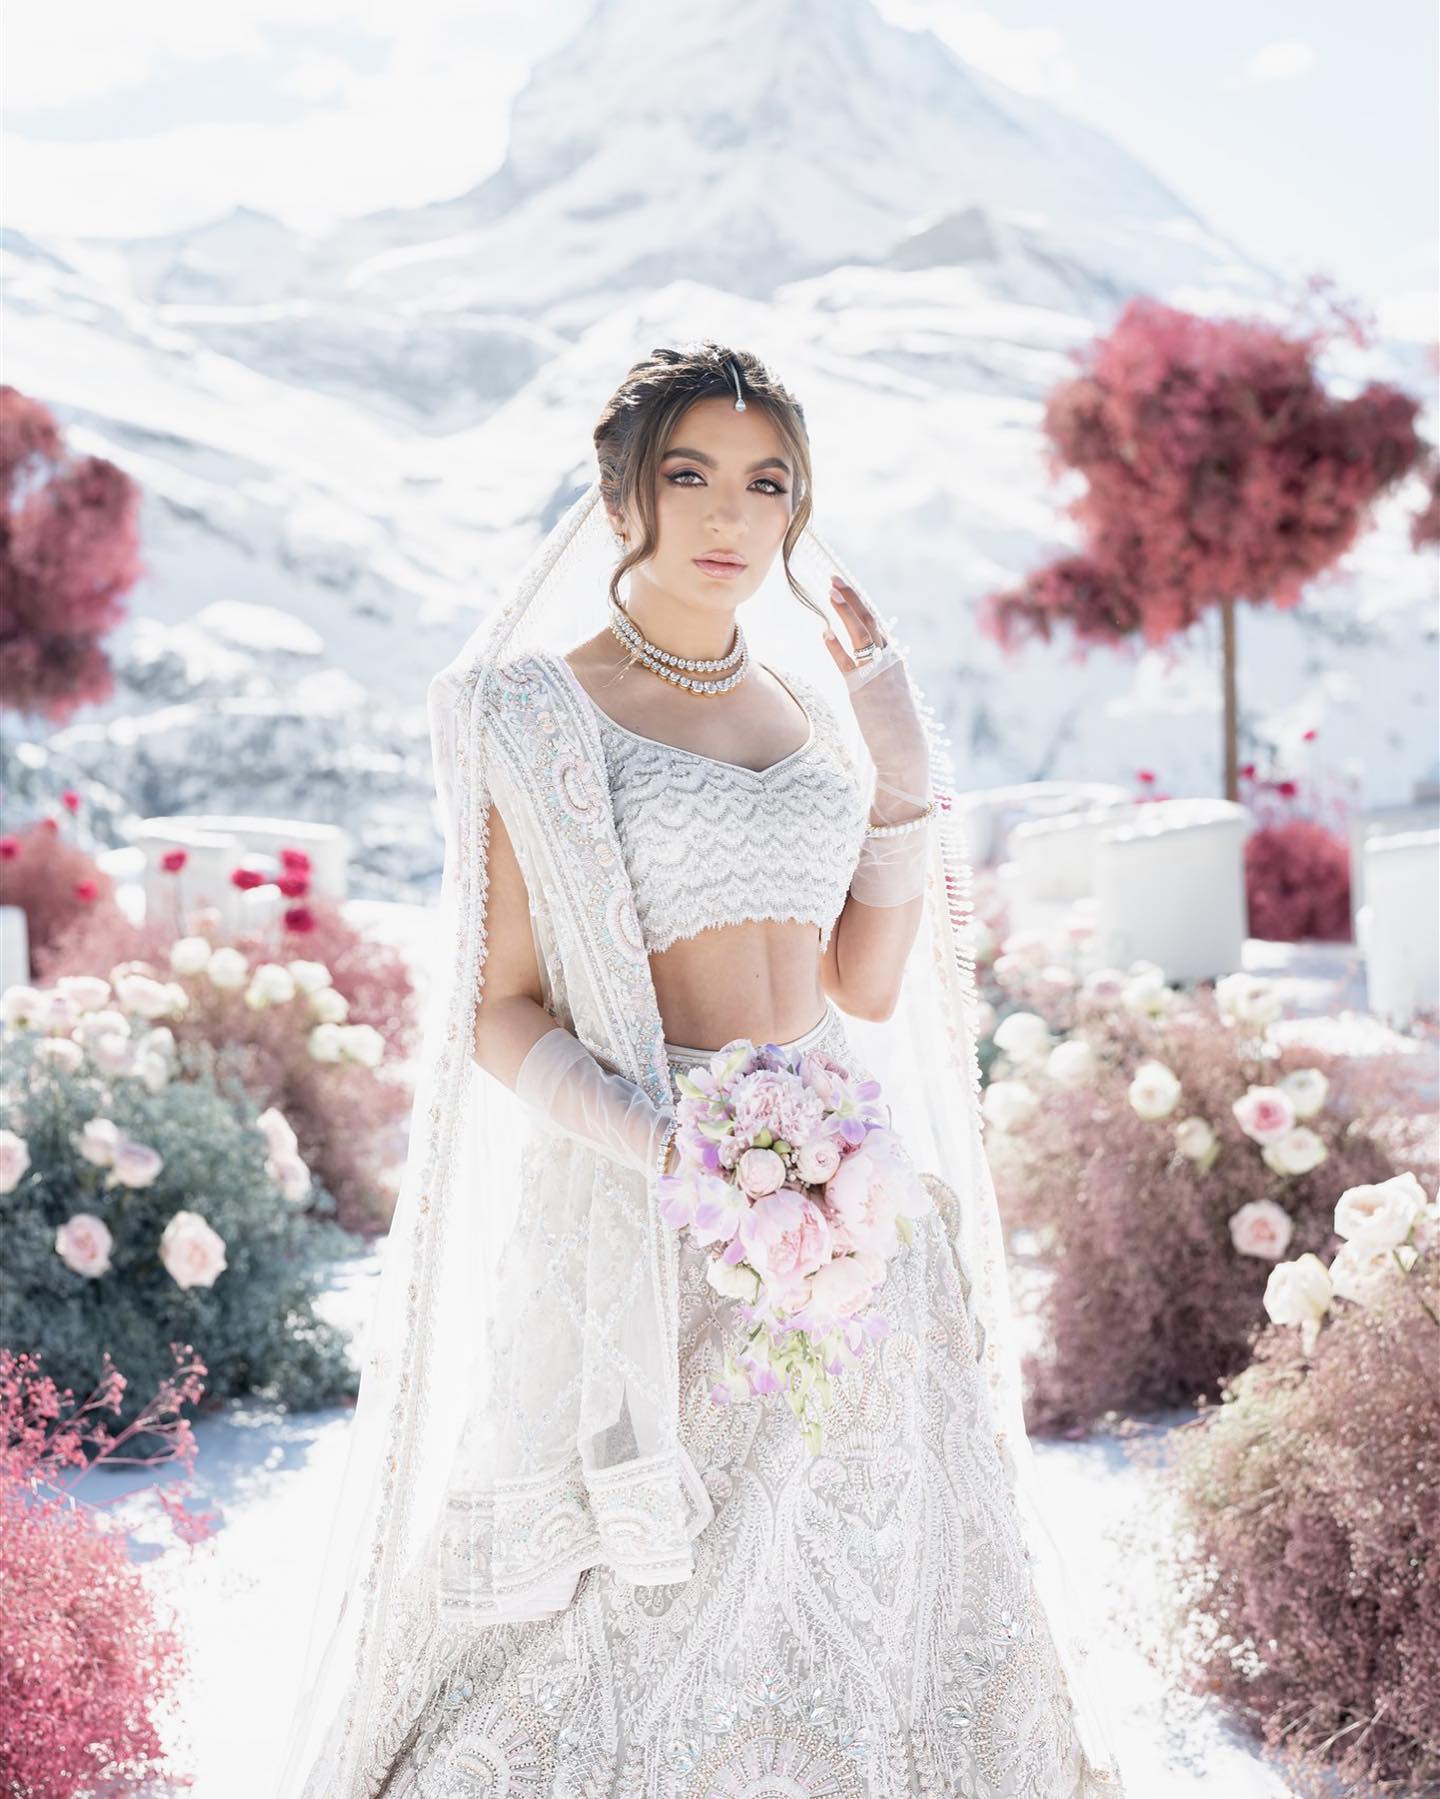 Trending And Latest Bridal Looks For Offbeat And OTB Brides